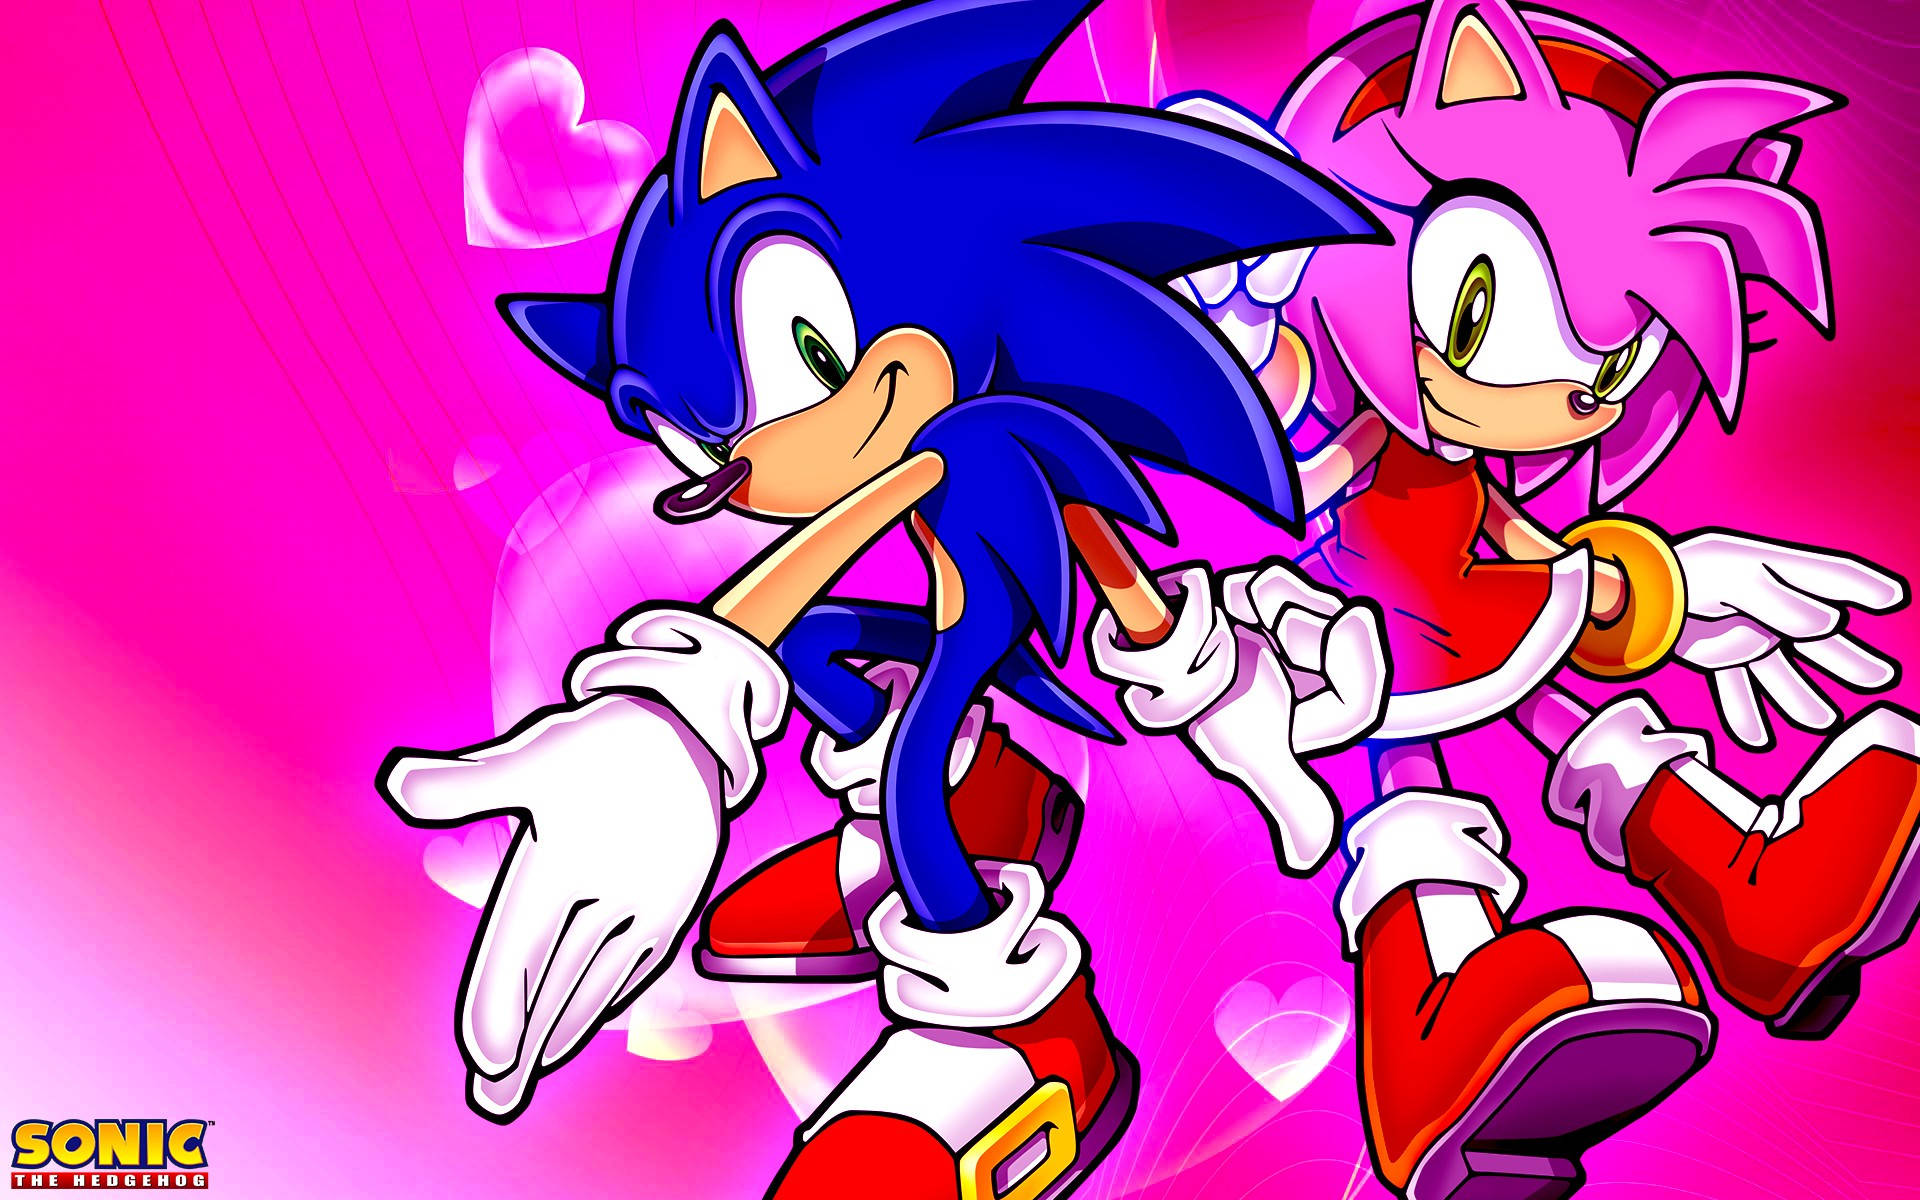 Coolasonic Och Amy (note: This Is The Literal Translation. In Swedish, Adjectives Are Inflected According To The Gender And Number Of The Noun They Modify. So If Sonic And Amy Were Both Male, The Adjective Would Be 